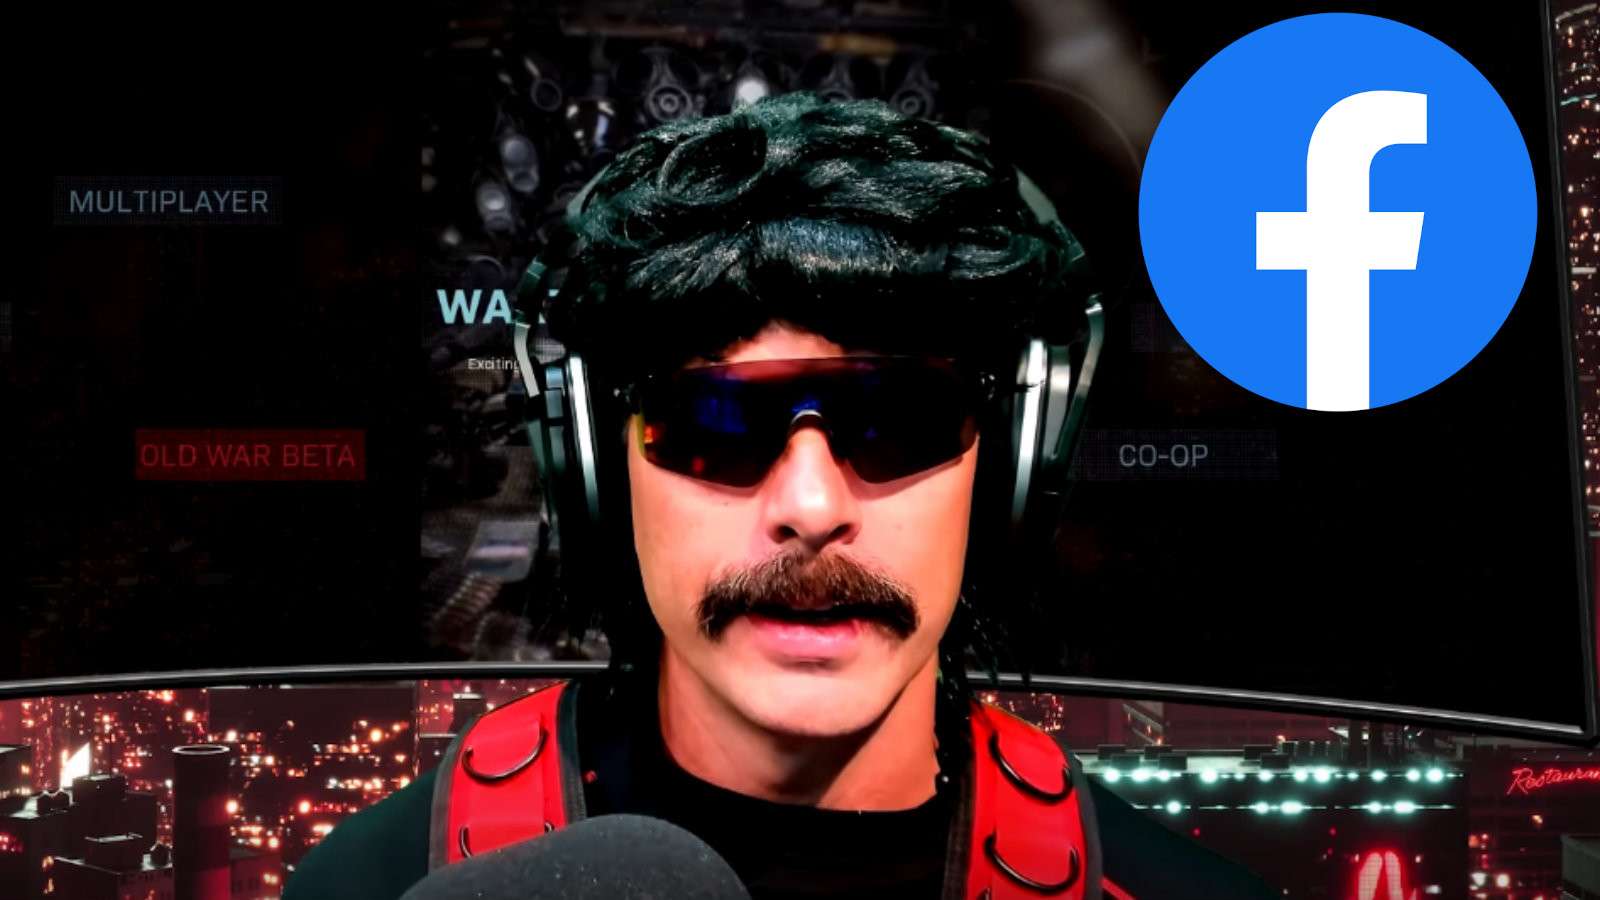 Dr Disrespect could go to Facebook